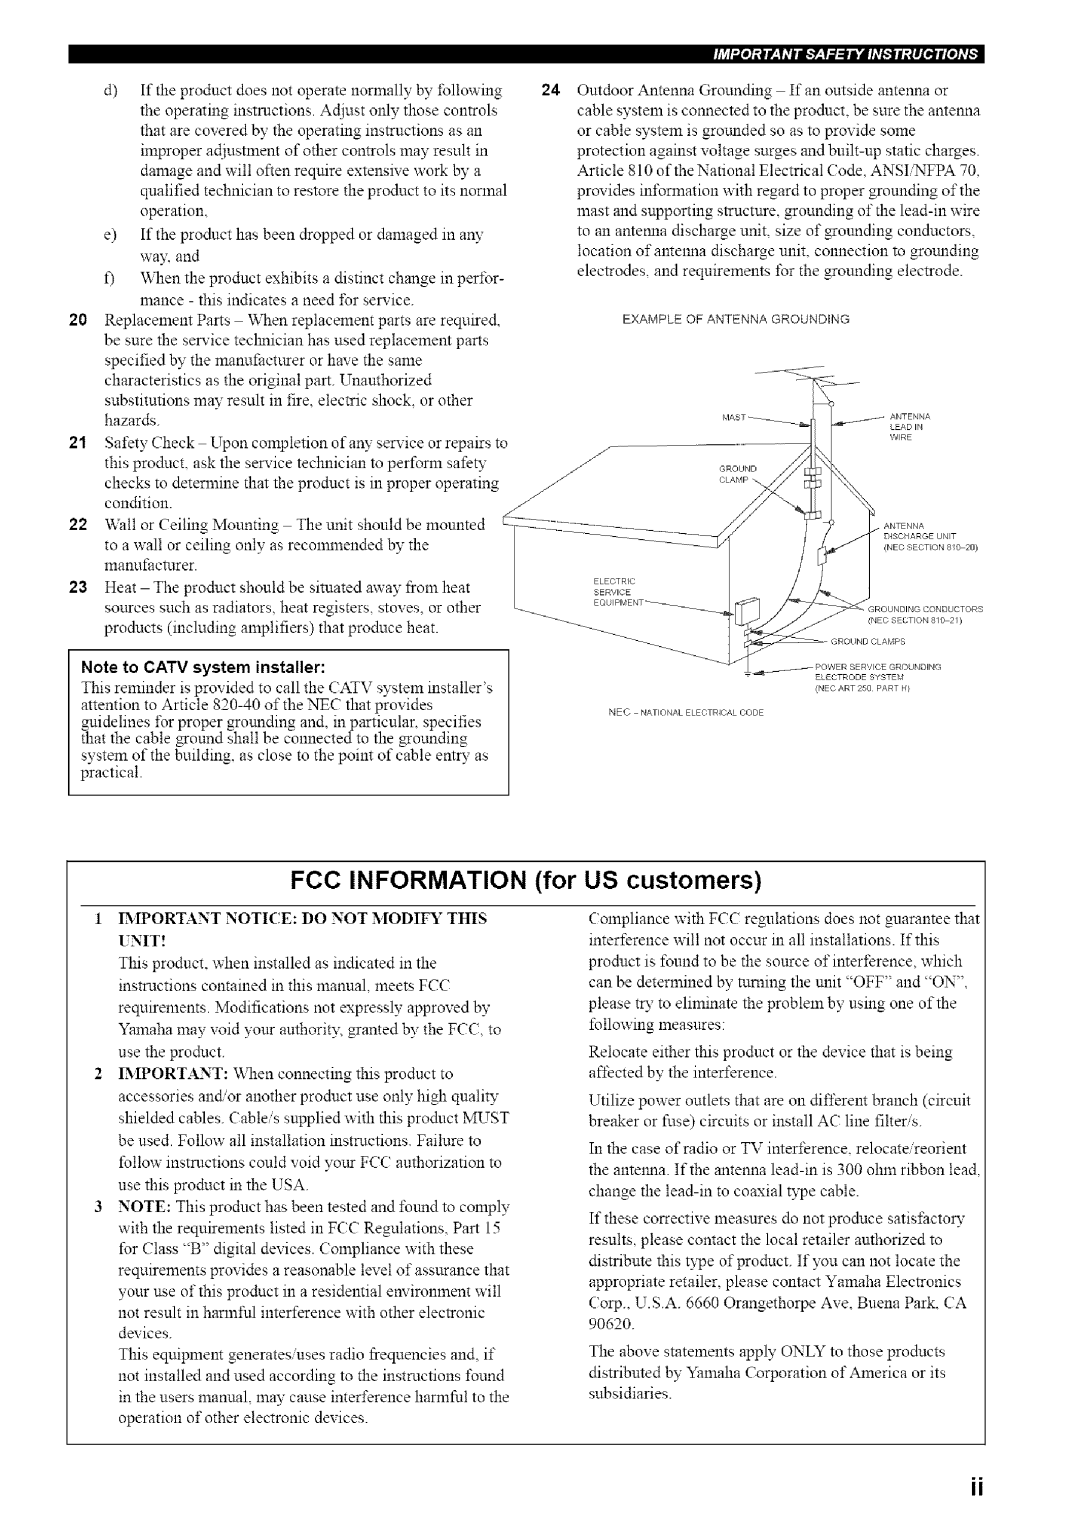 Yamaha HTR-5835 owner manual FCC INFORMATION for US customers, 21 22 23, Note to CATV system installer 